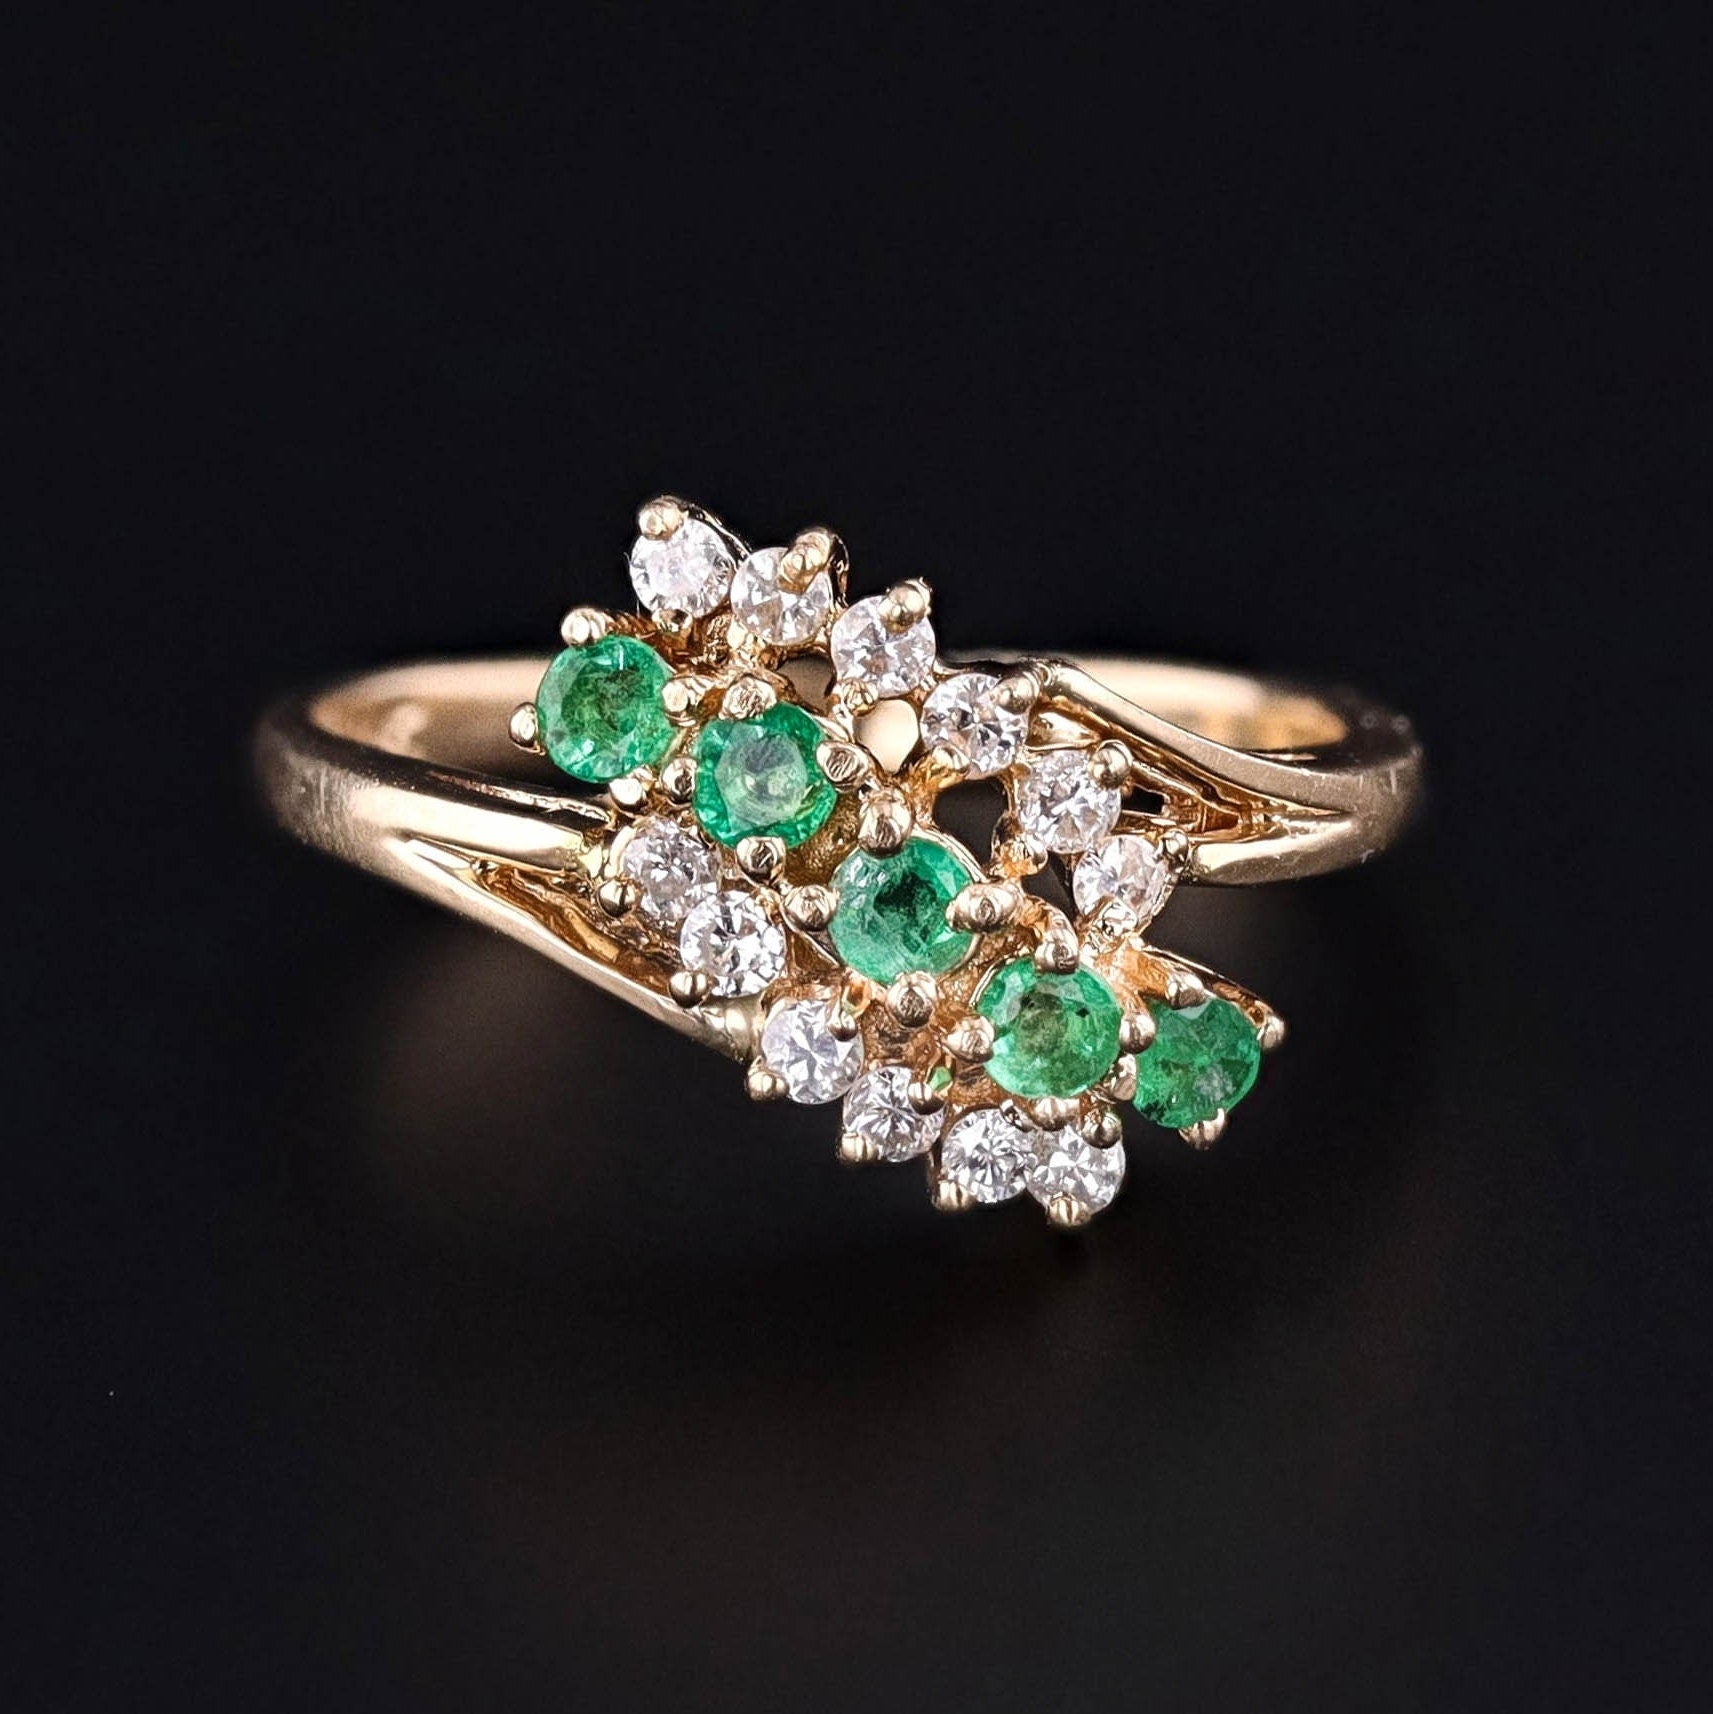 Vintage Emerald and Diamond Ring of 14k Gold